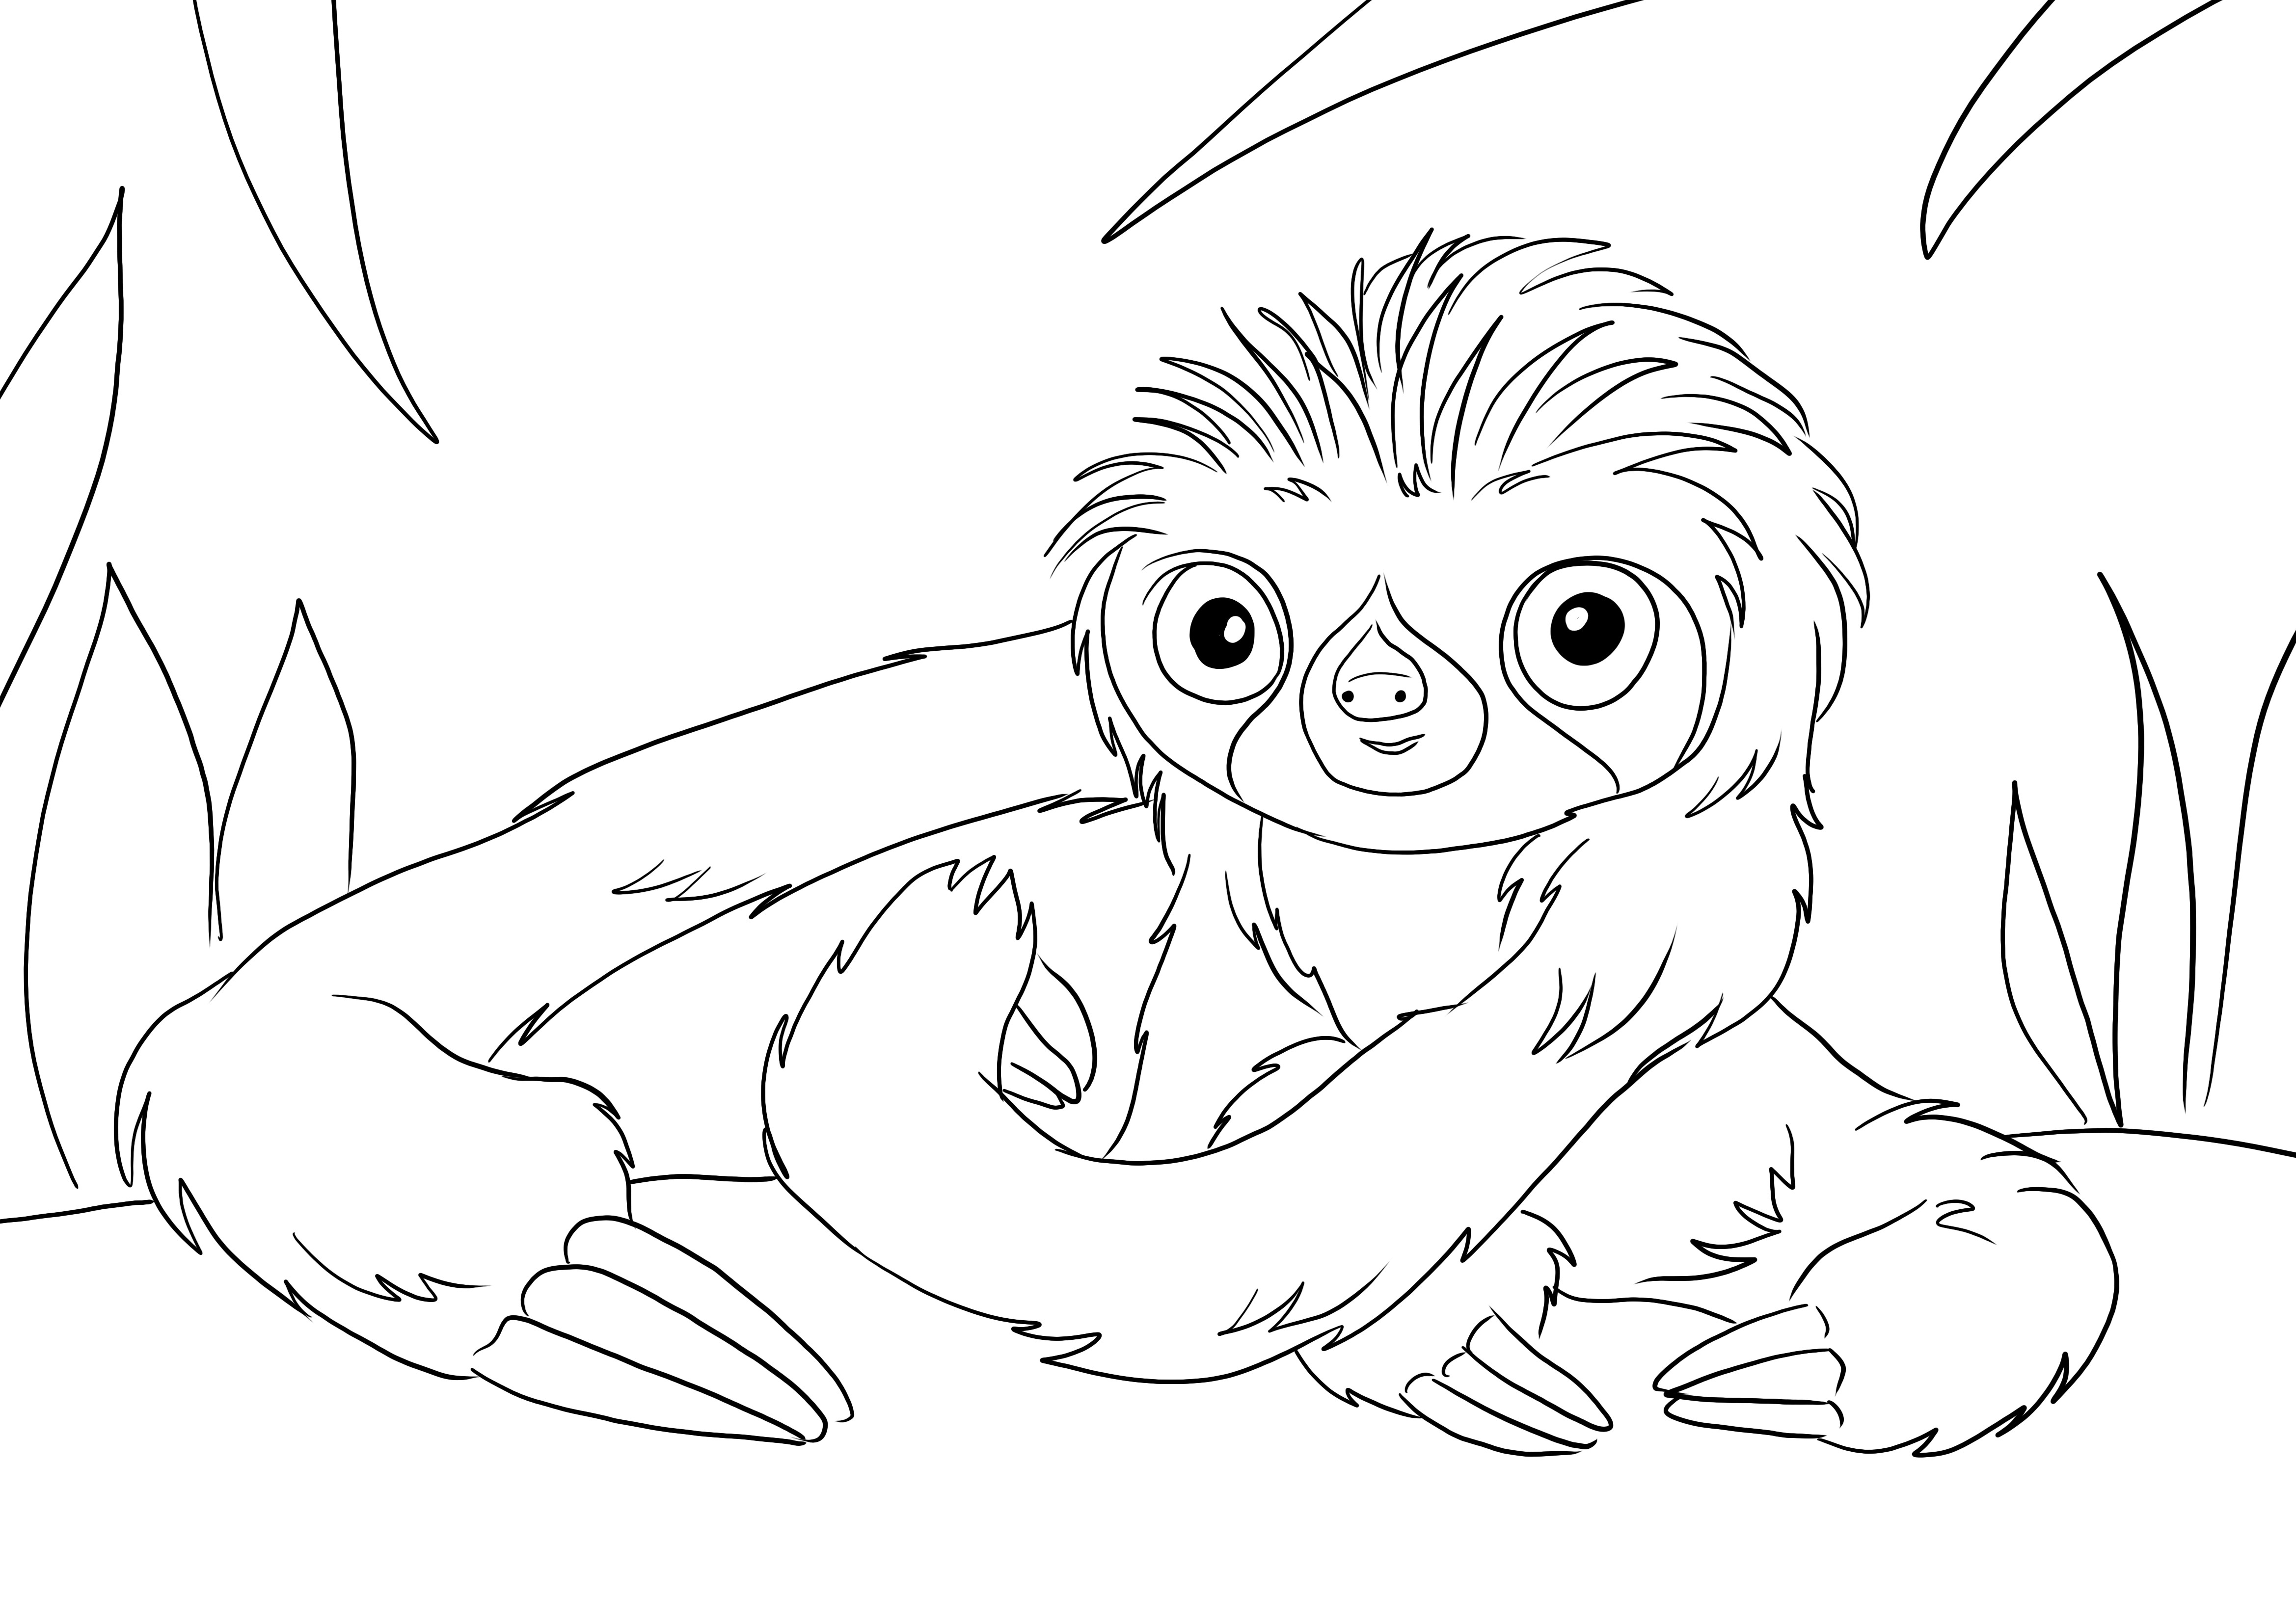 Here is a free printable of Belt from the Croods cartoon easy-to-color page